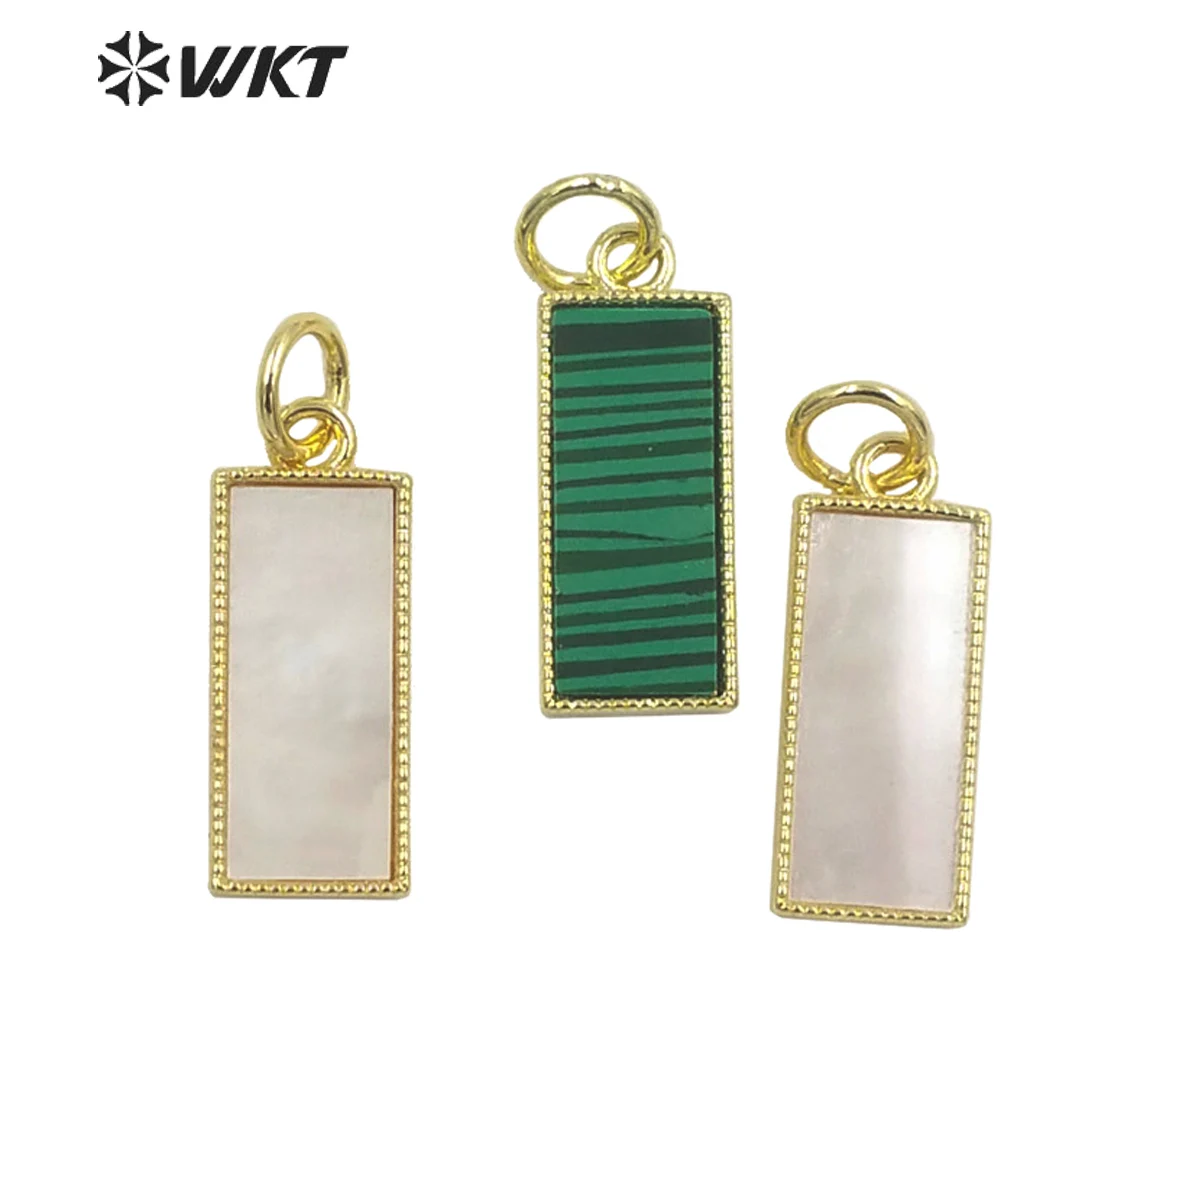 

WT-JP324 WKT 2022 Noble rectangle shape MOP pendant gold-plate Fashion party gift pendant high quality accessory trend hot